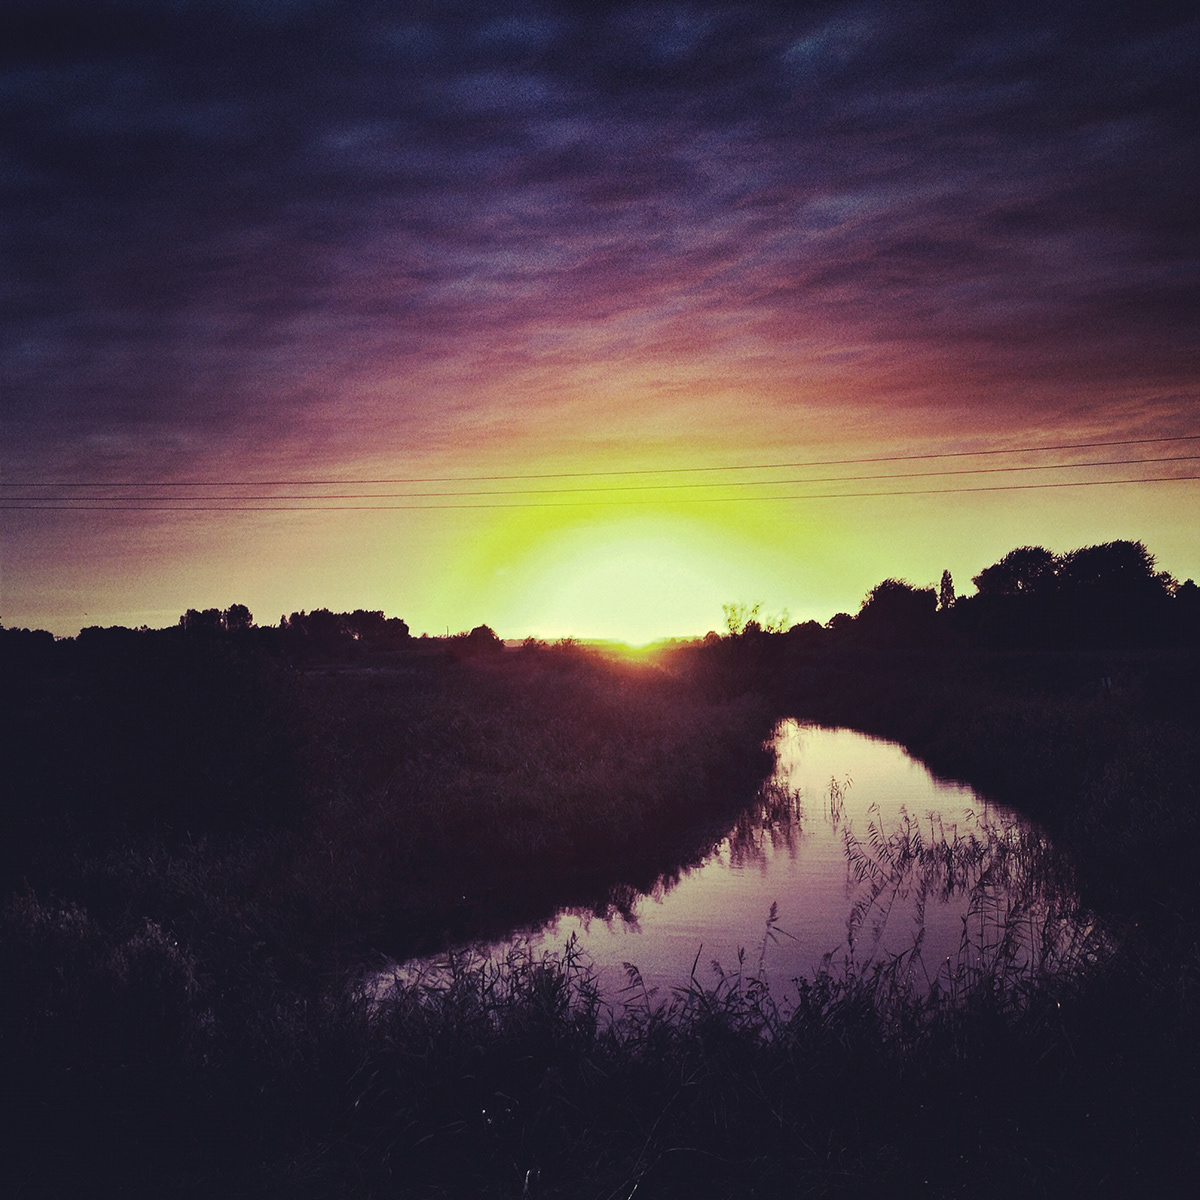 Landscape sunset field outdoors iphone mobile apps edit Edited Beautiful horizon